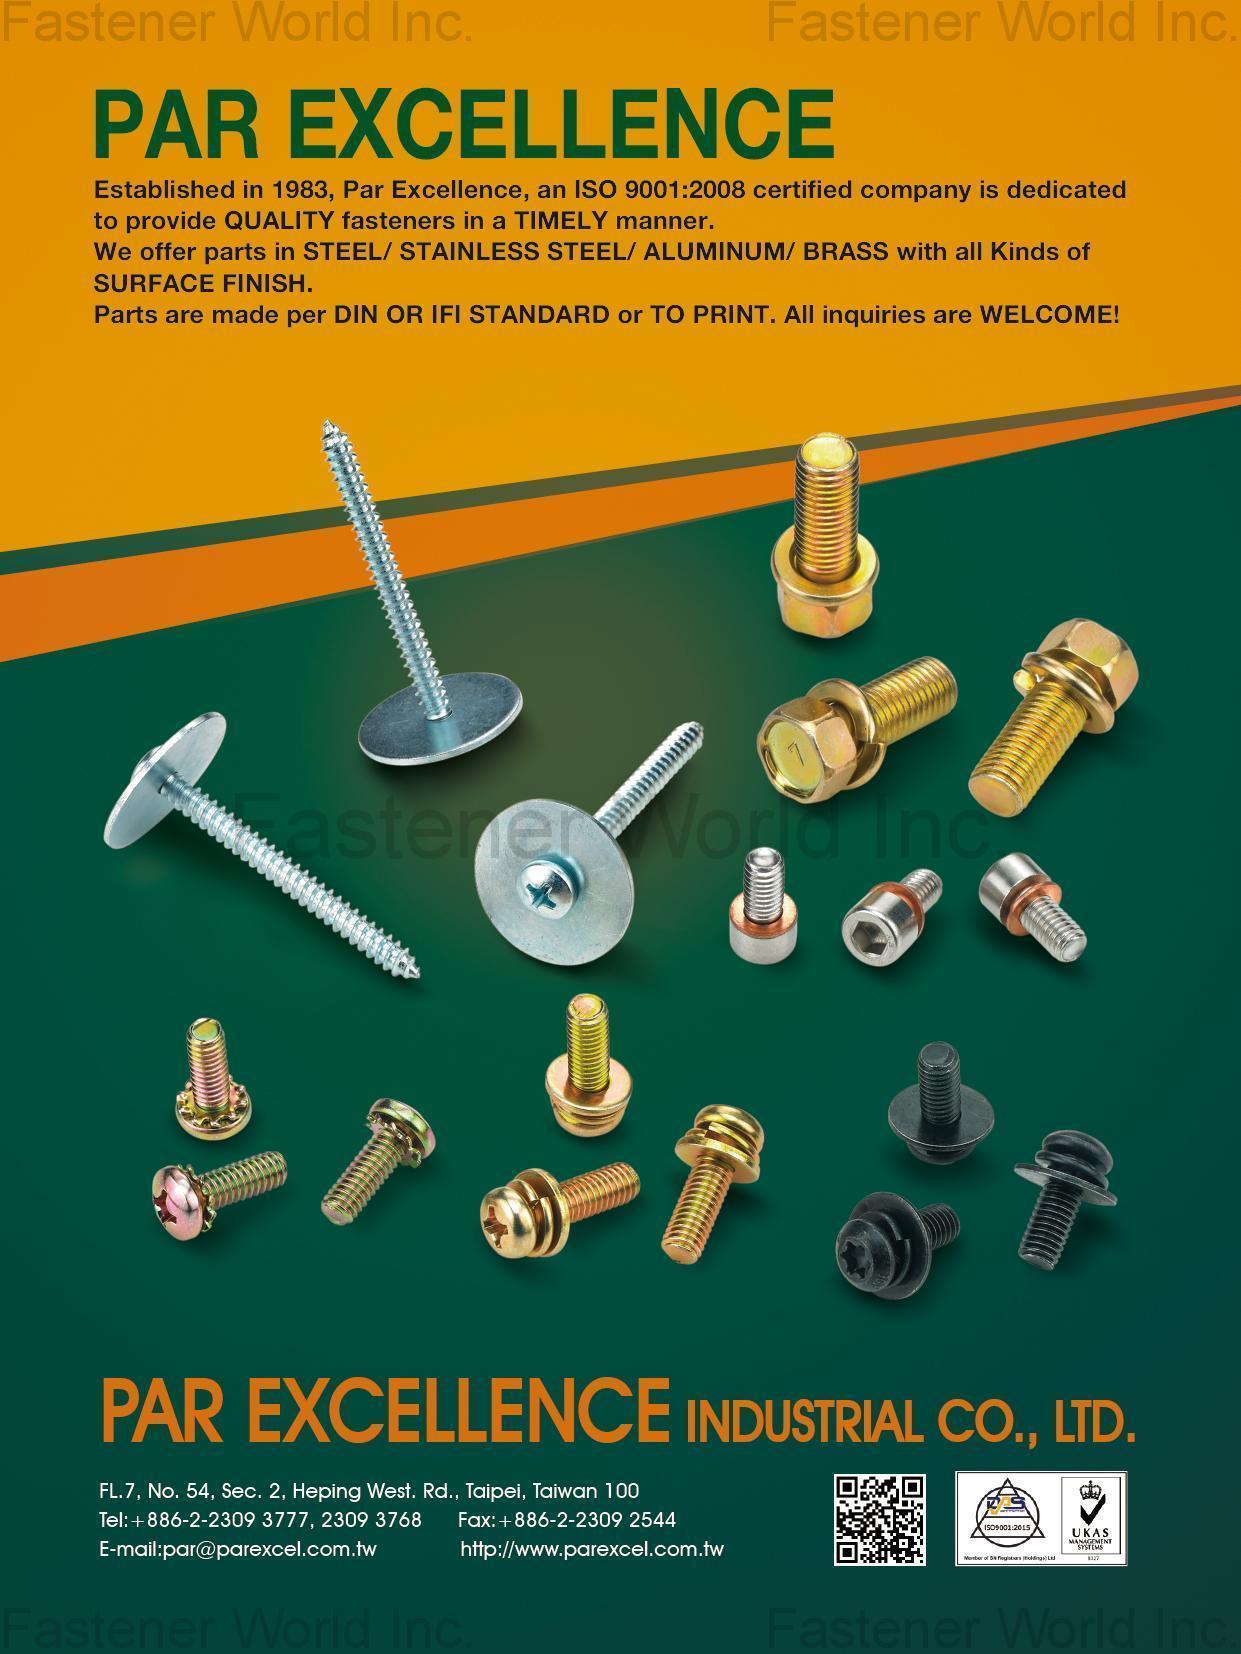 PAR EXCELLENCE INDUSTRIAL CO., LTD.  , Steel,Stainless Steel,Aluminum,Brass with all kind of Surface Finish